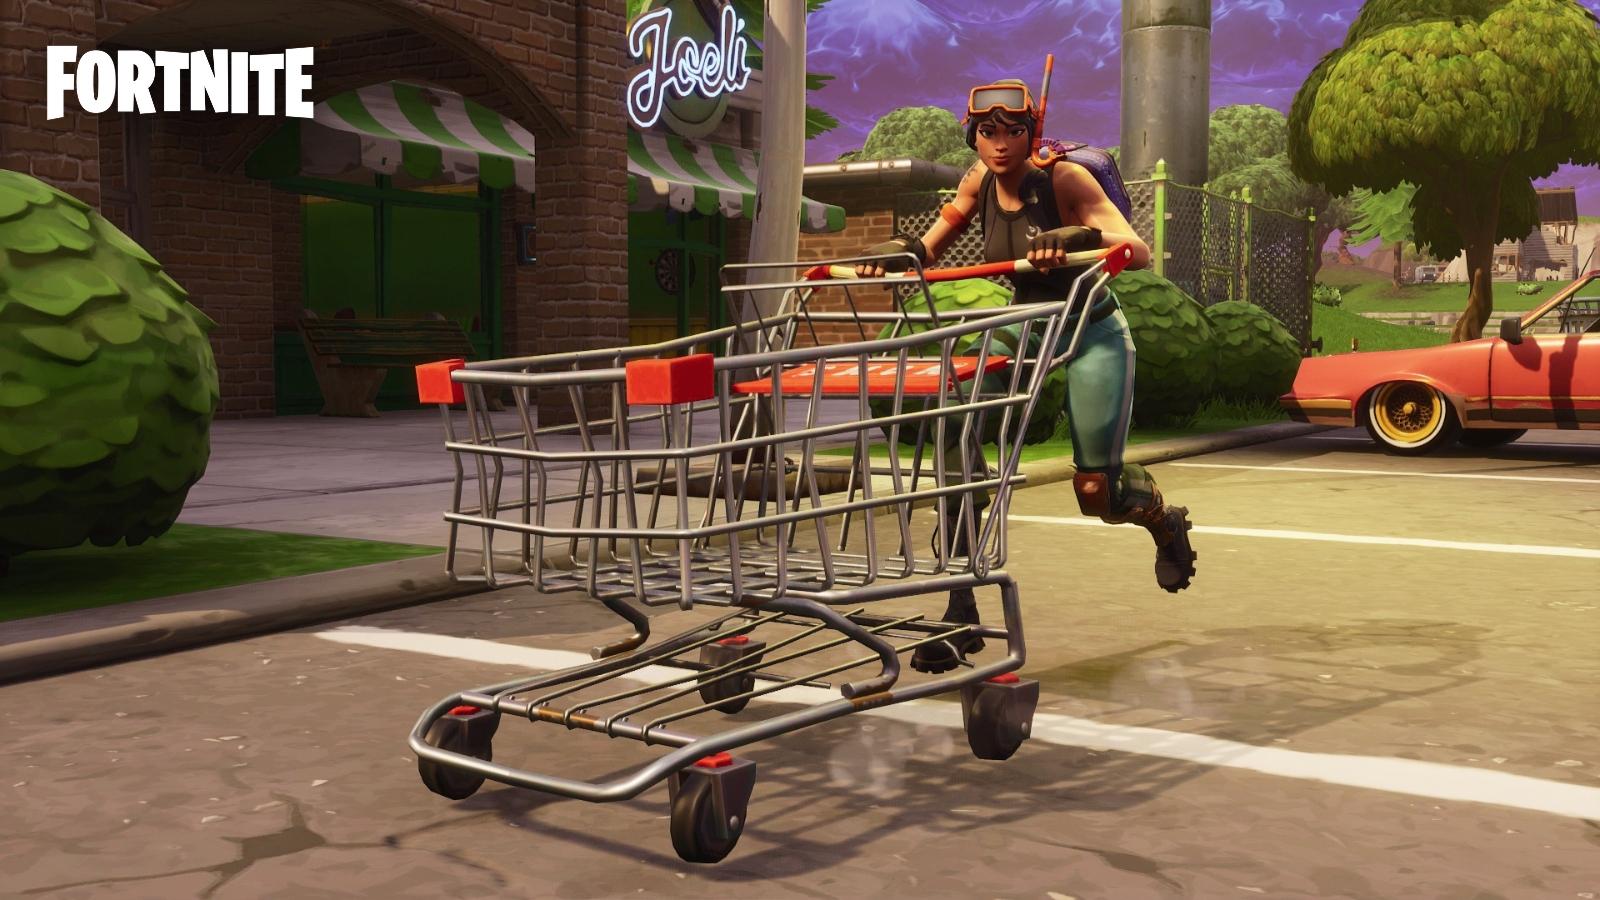 Fortnite player riding a Shopping Cart